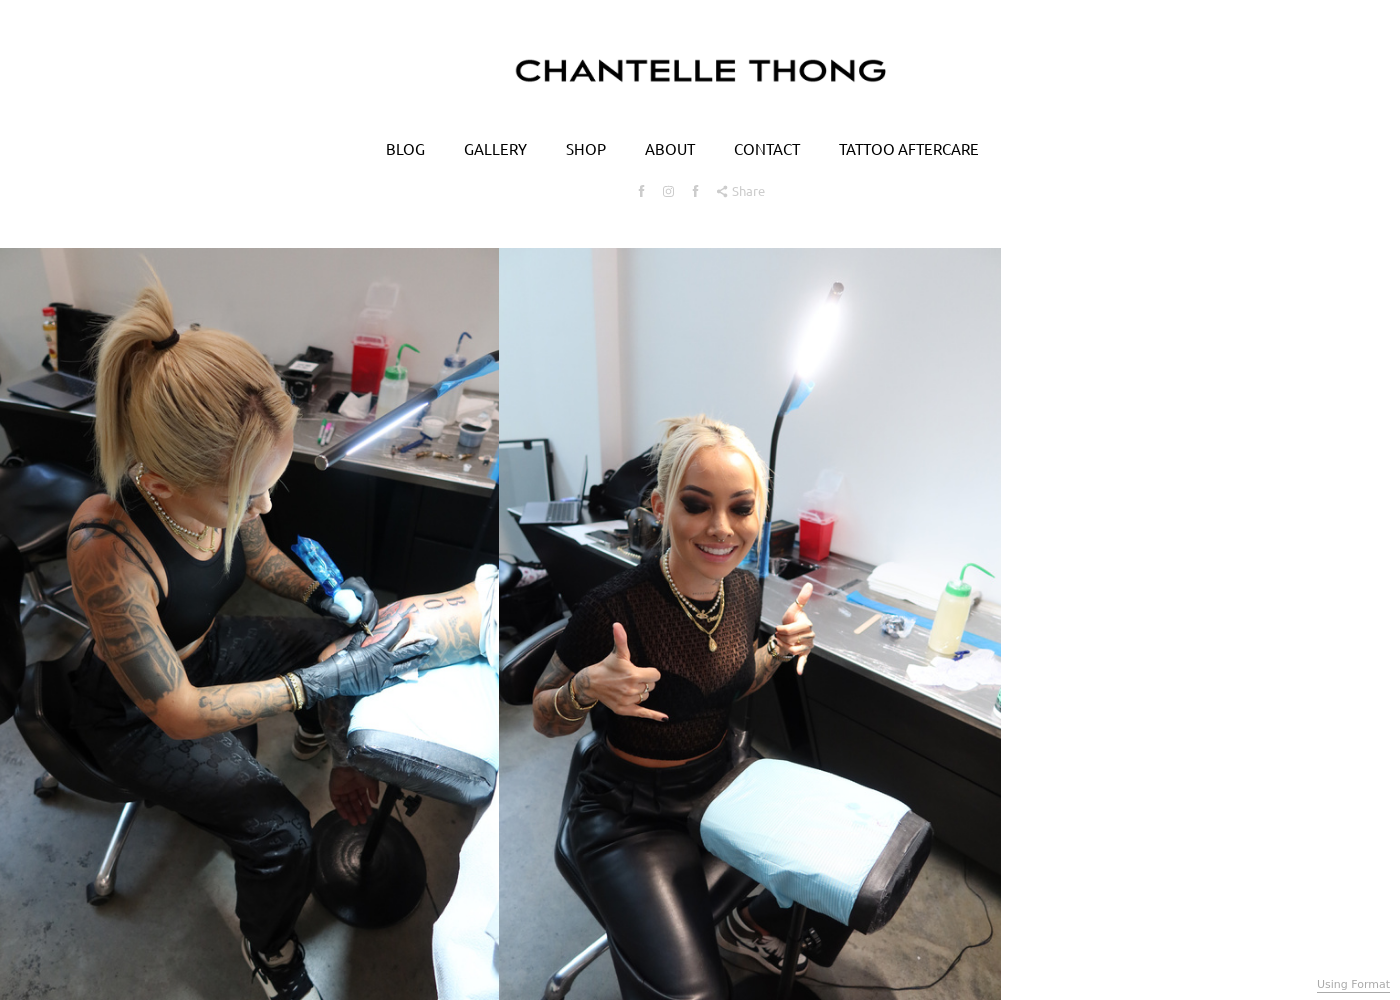 Chantelle Thong Tattoos - Looking forward to smashing out some